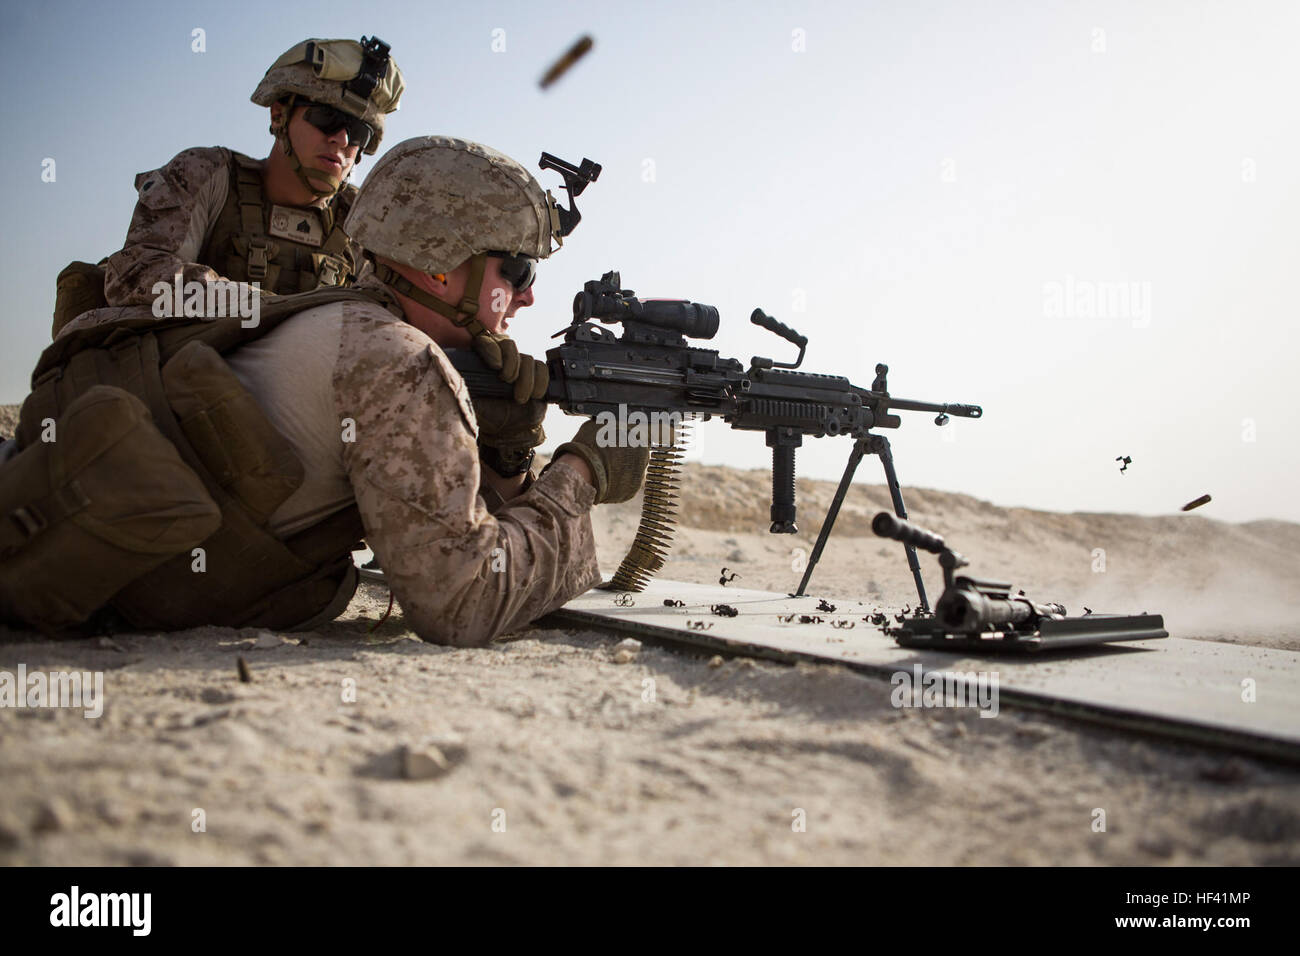 U.S. Marine Corps Cpl. Kyle Hancock, a fire team leader with Company C, Marine Wing Support Squadron 373, Special Purpose Marine Air Ground Task Force - Crisis Response - Central Command 16.2, fires an M249 light machine gun during a familiarization range at an undisclosed location in Southwest Asia, June 8, 2016. SPMAGTF-CR-CC is forward deployed in several host nations, with the ability to respond to a variety of contingencies rapidly and effectively. (U.S. Marine Corps photo by Sgt. Donald Holbert/ Released) Security Force Marines learn to employ machine guns 160608-M-HB658-015 Stock Photo